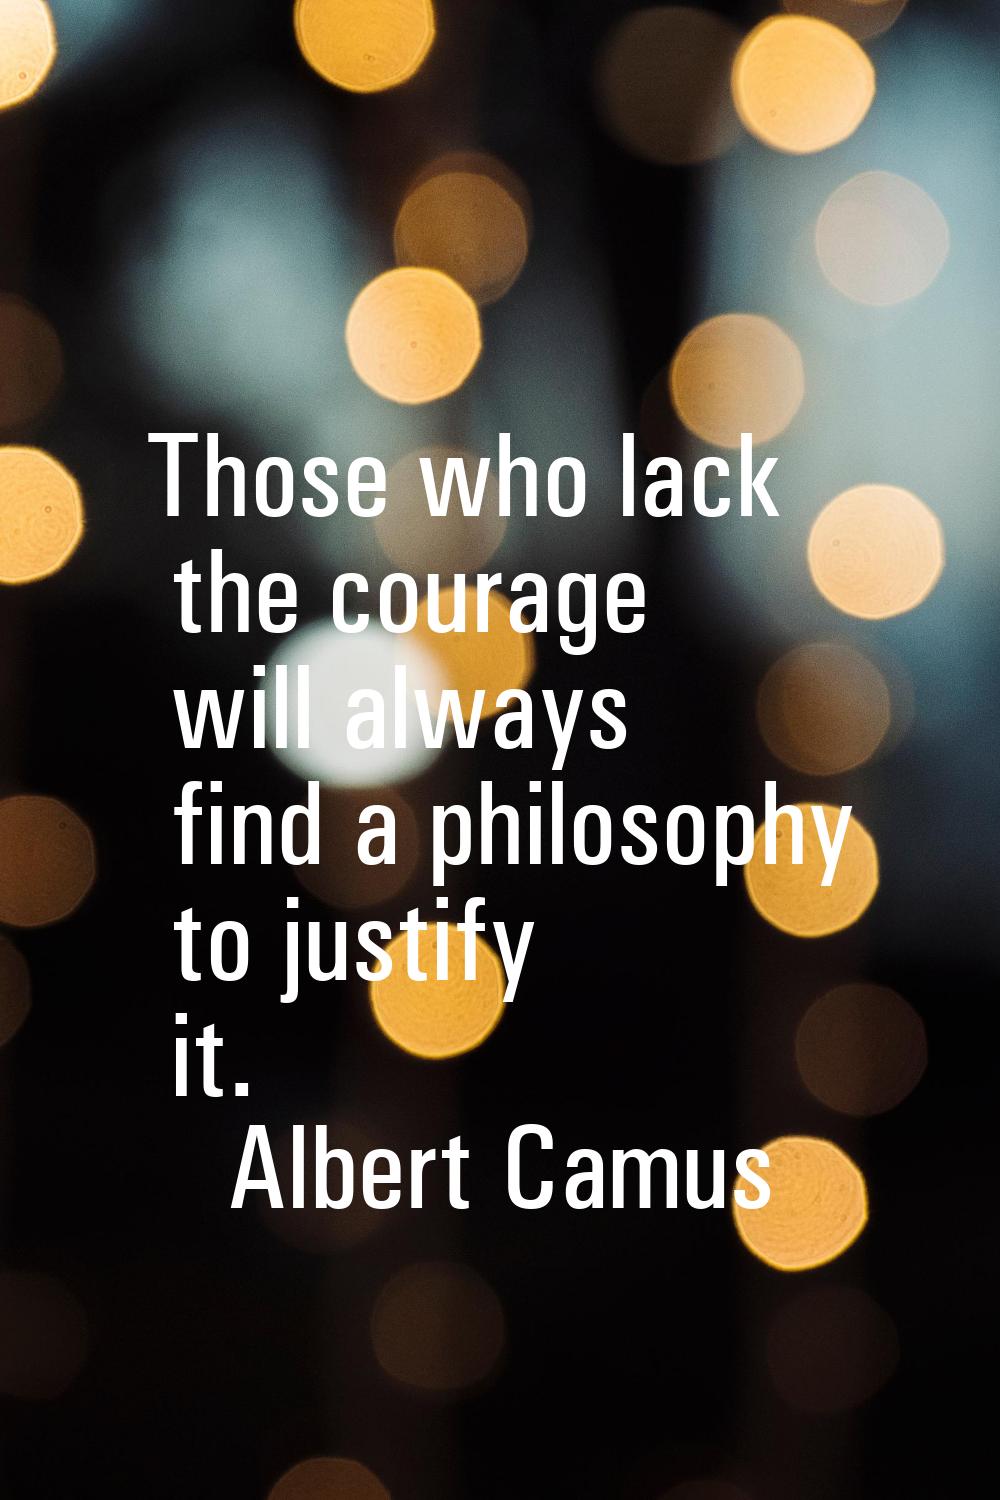 Those who lack the courage will always find a philosophy to justify it.